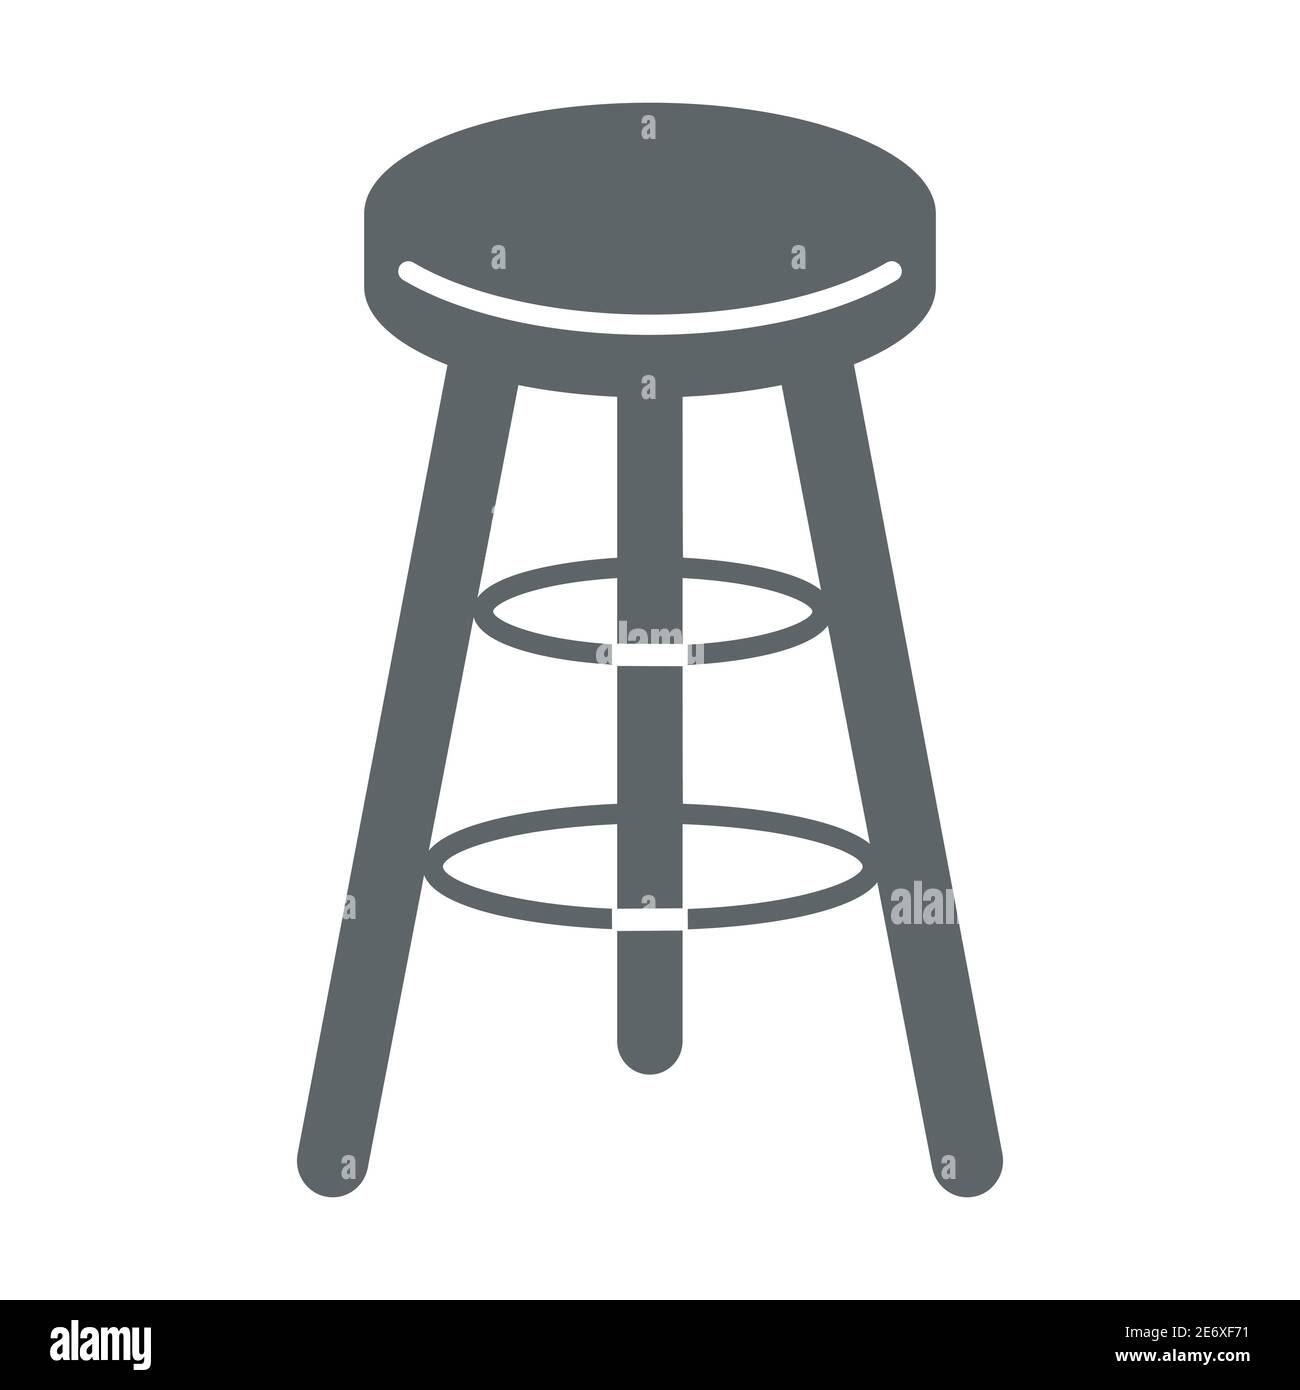 Bar stool solid icon, Kitchen furniture concept, Bar chair sign on white background, High chair icon in glyph style for mobile concept and web design Stock Vector